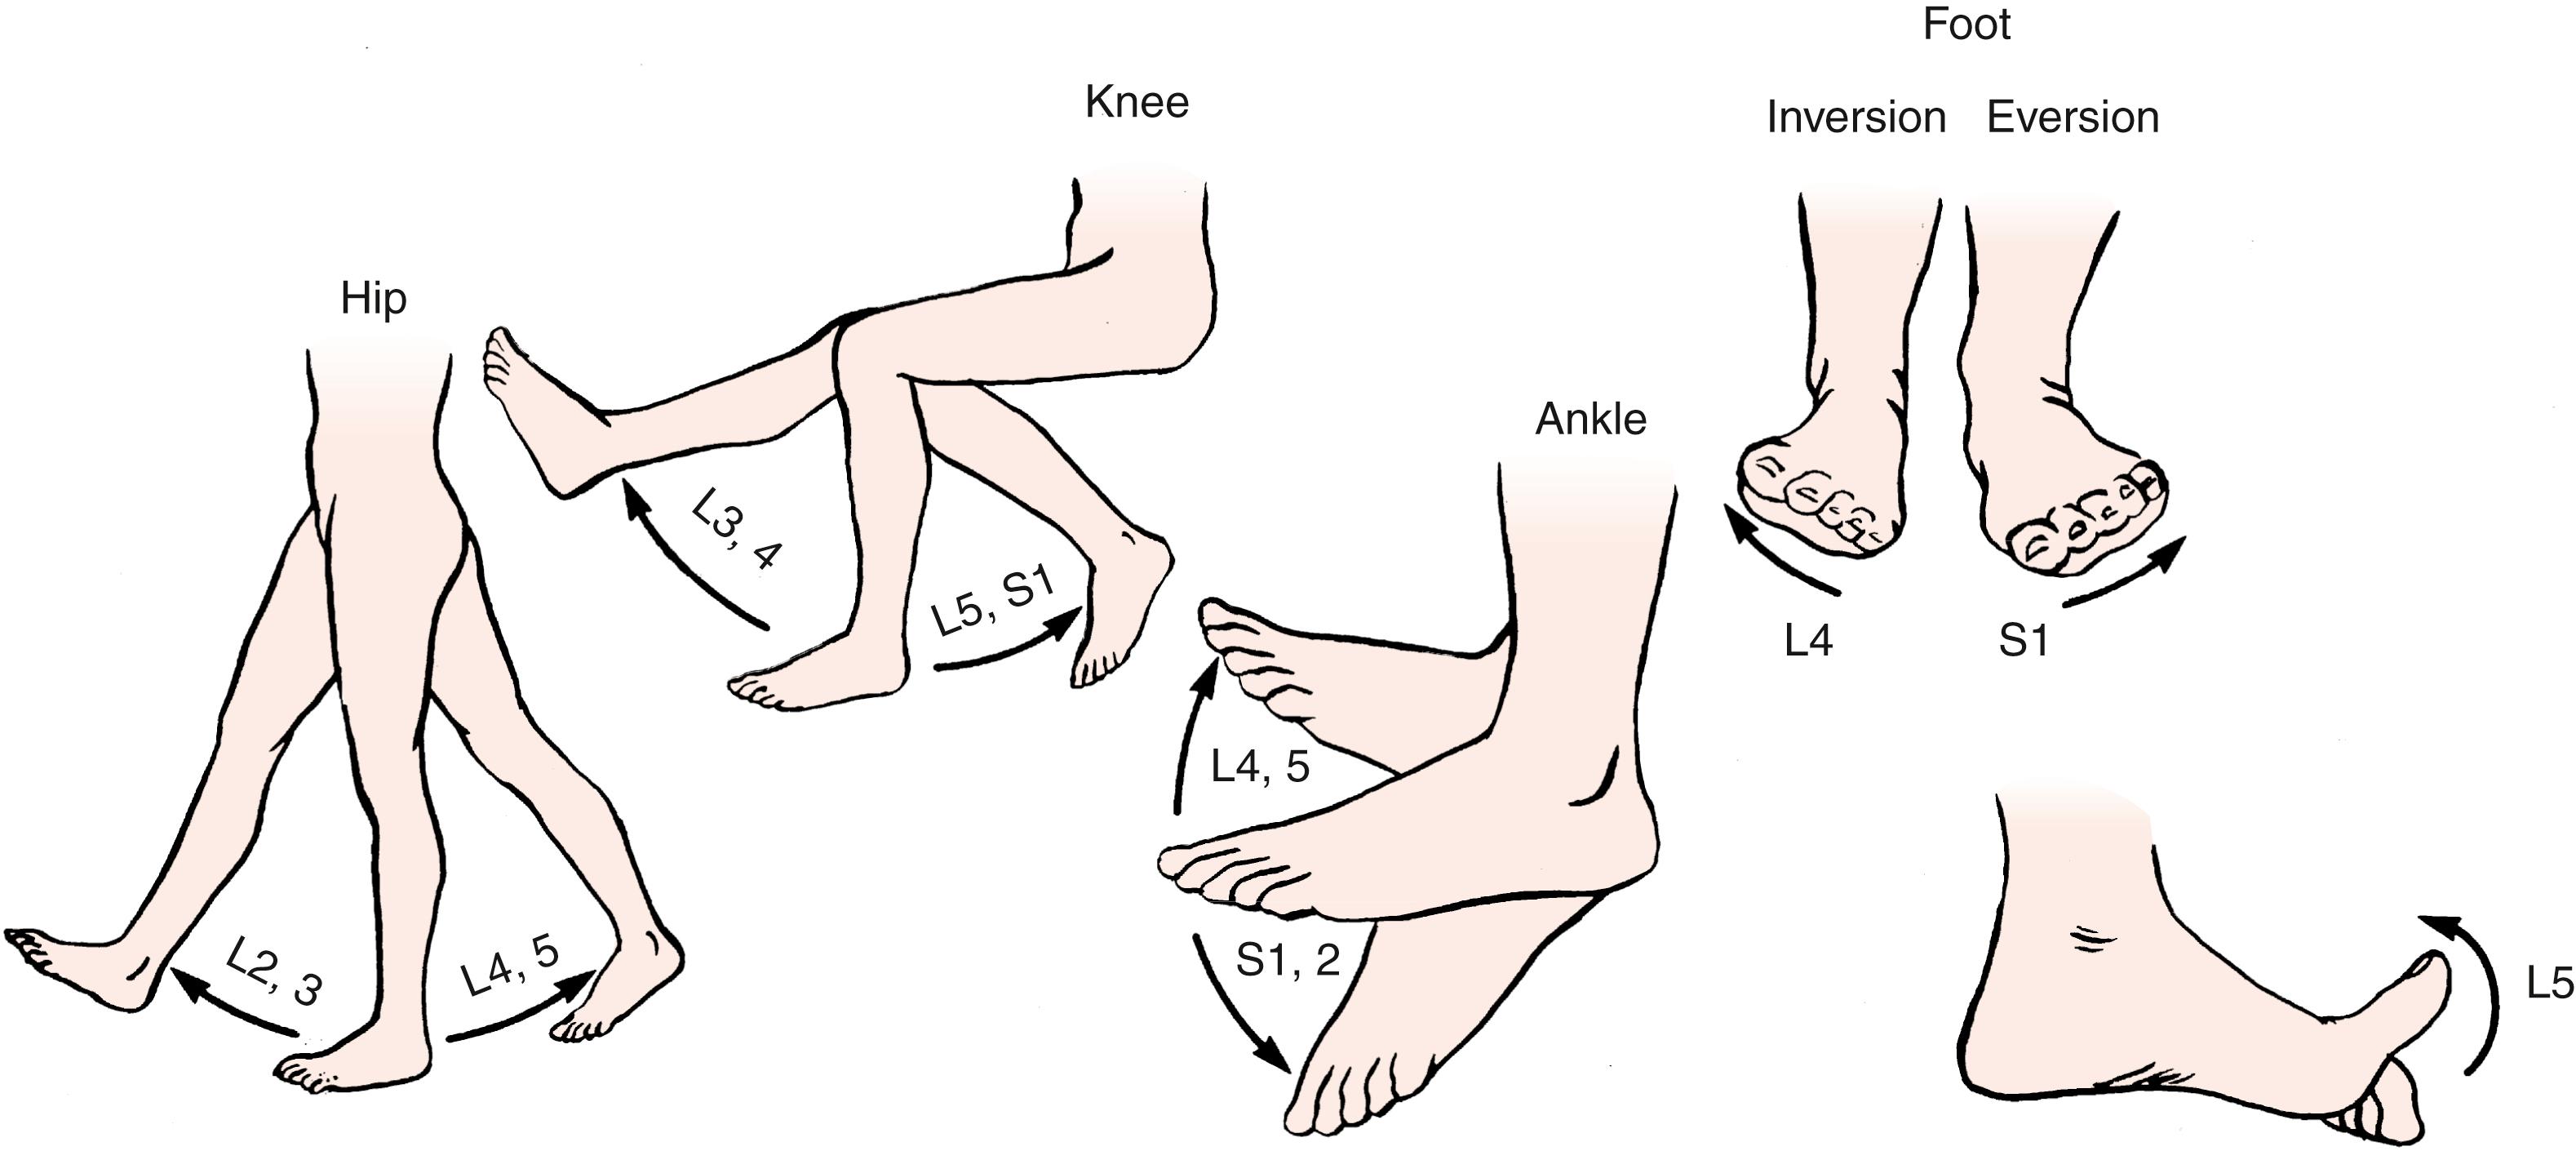 Fig. 46.3, Motor control of the lower extremity.